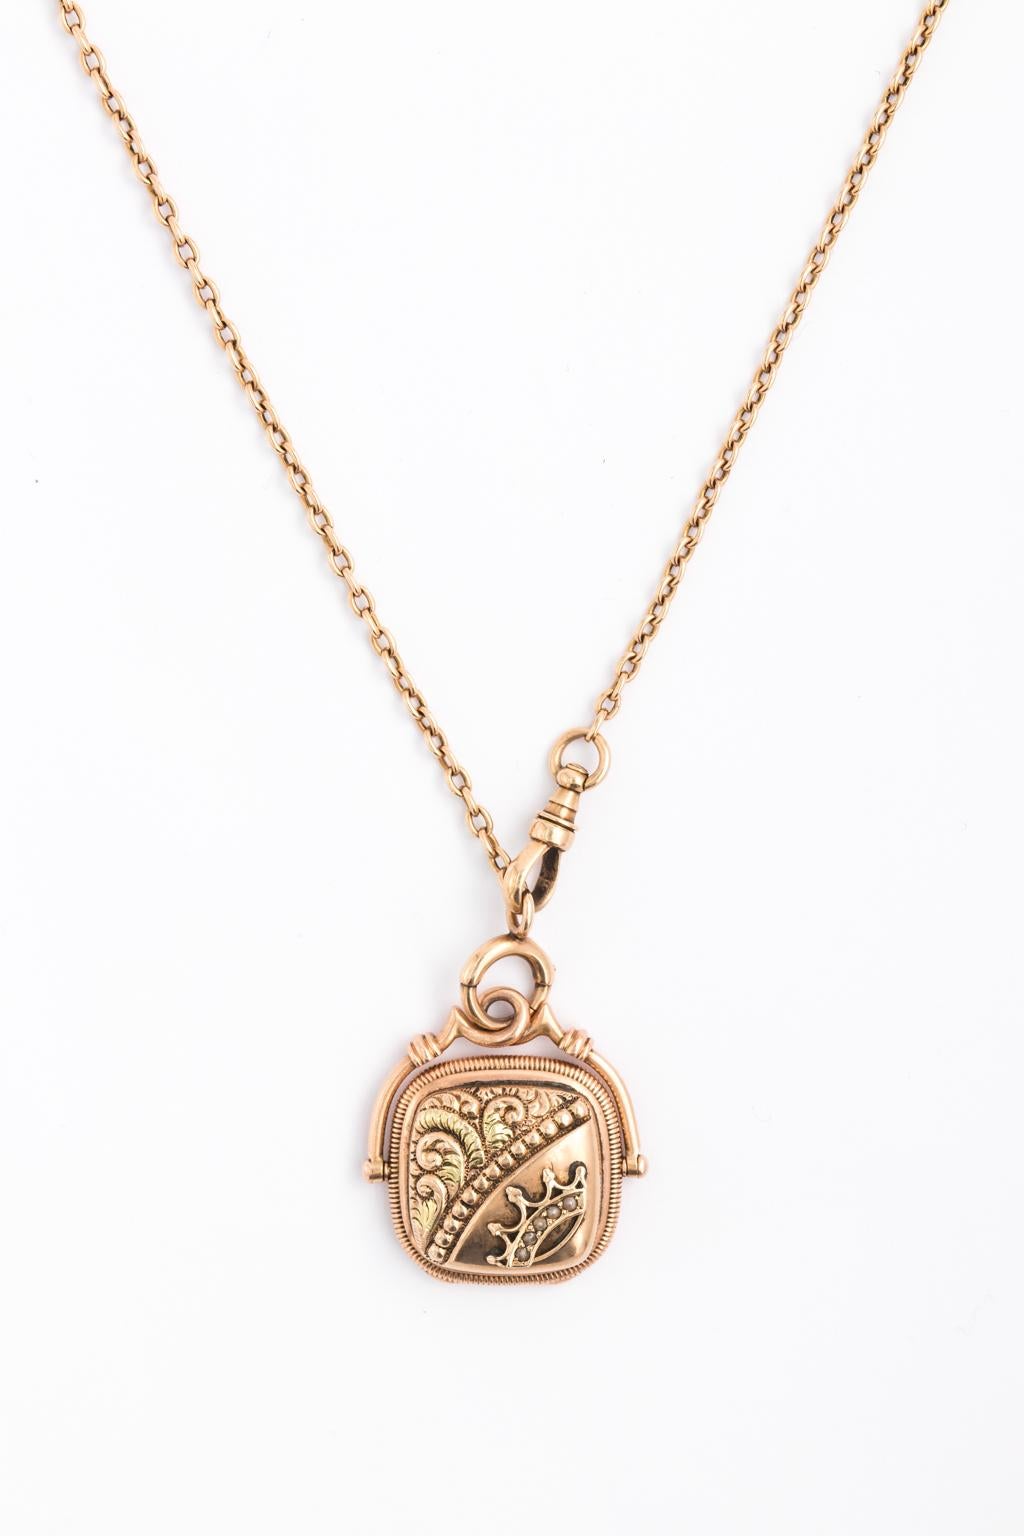 Art Deco curb watch chain in 14kt gold with a photo locket charm with pearl decoration on the front. Locket opening on the indentation on the bottom of charm.